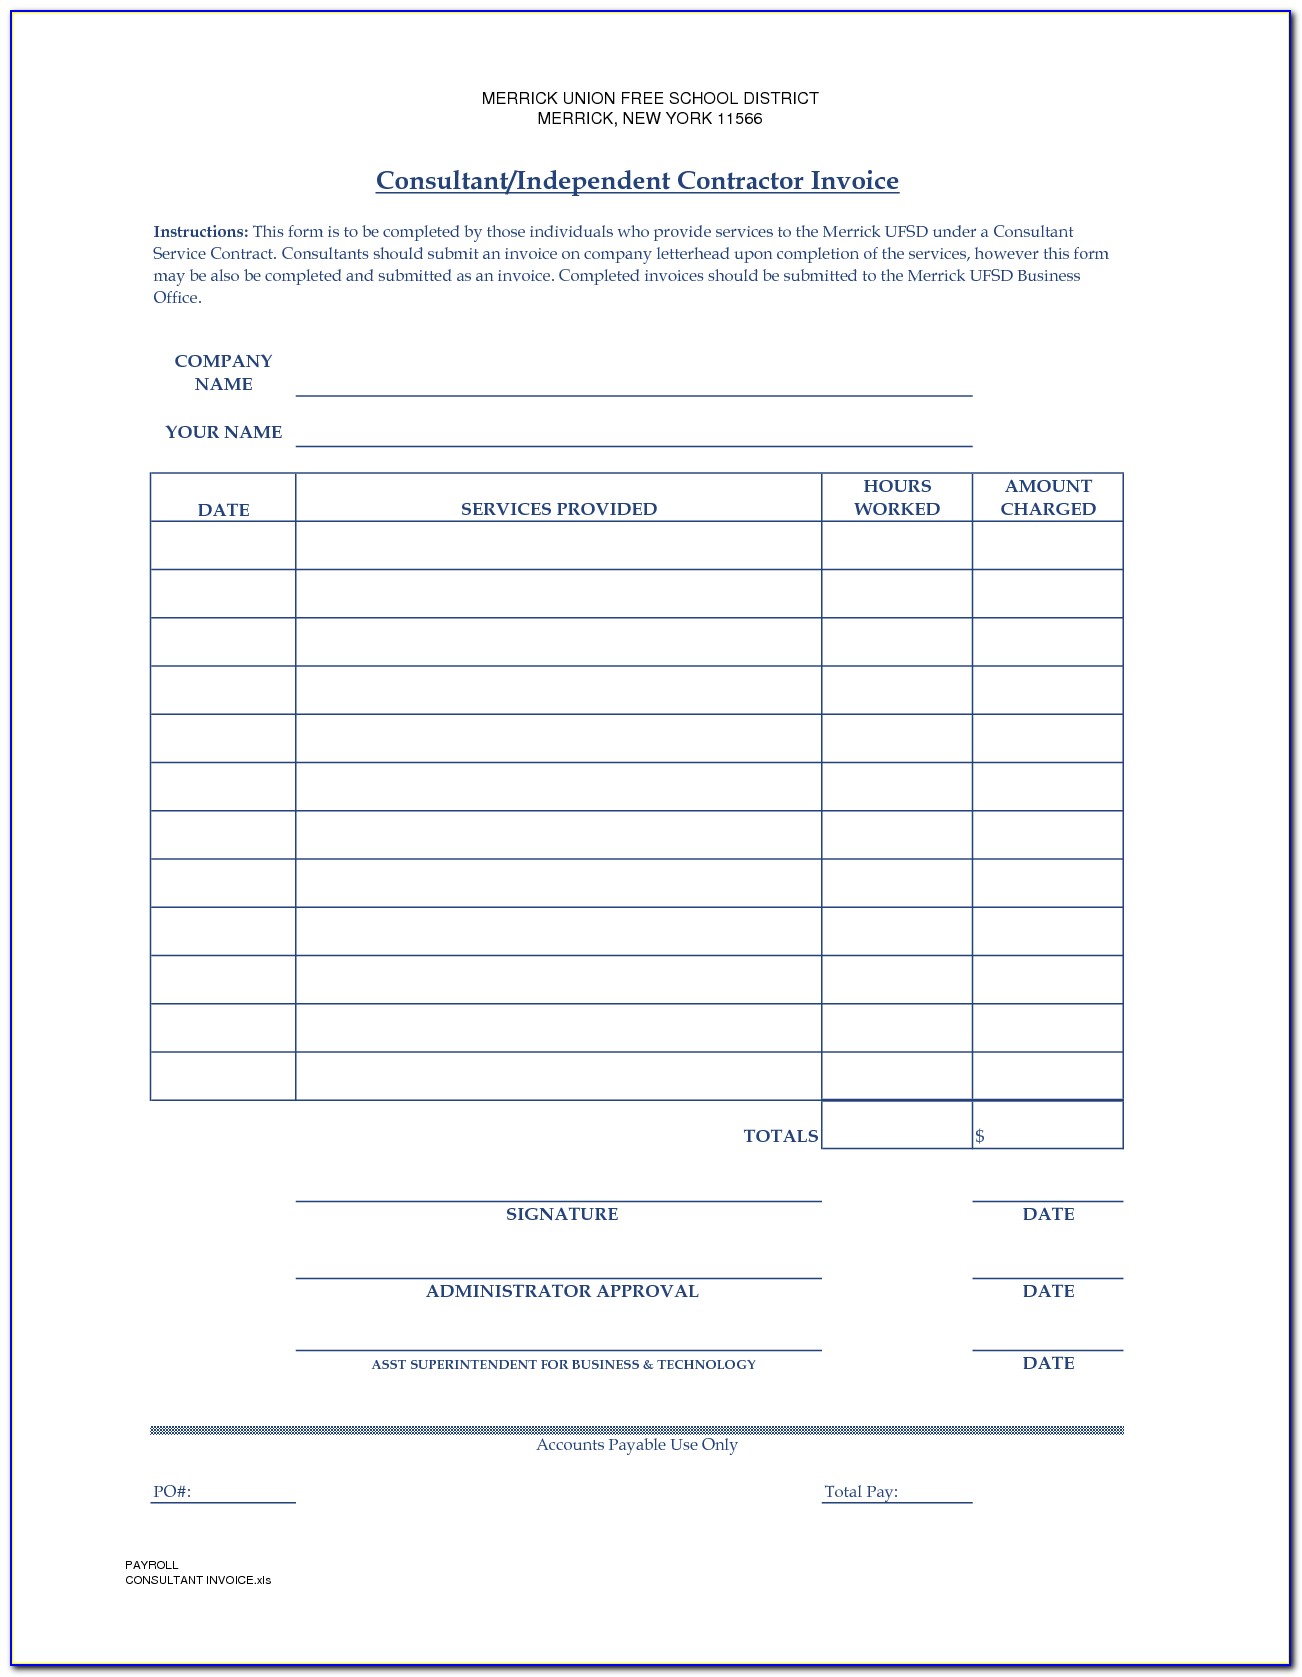 Contract Agreement Template Microsoft Word